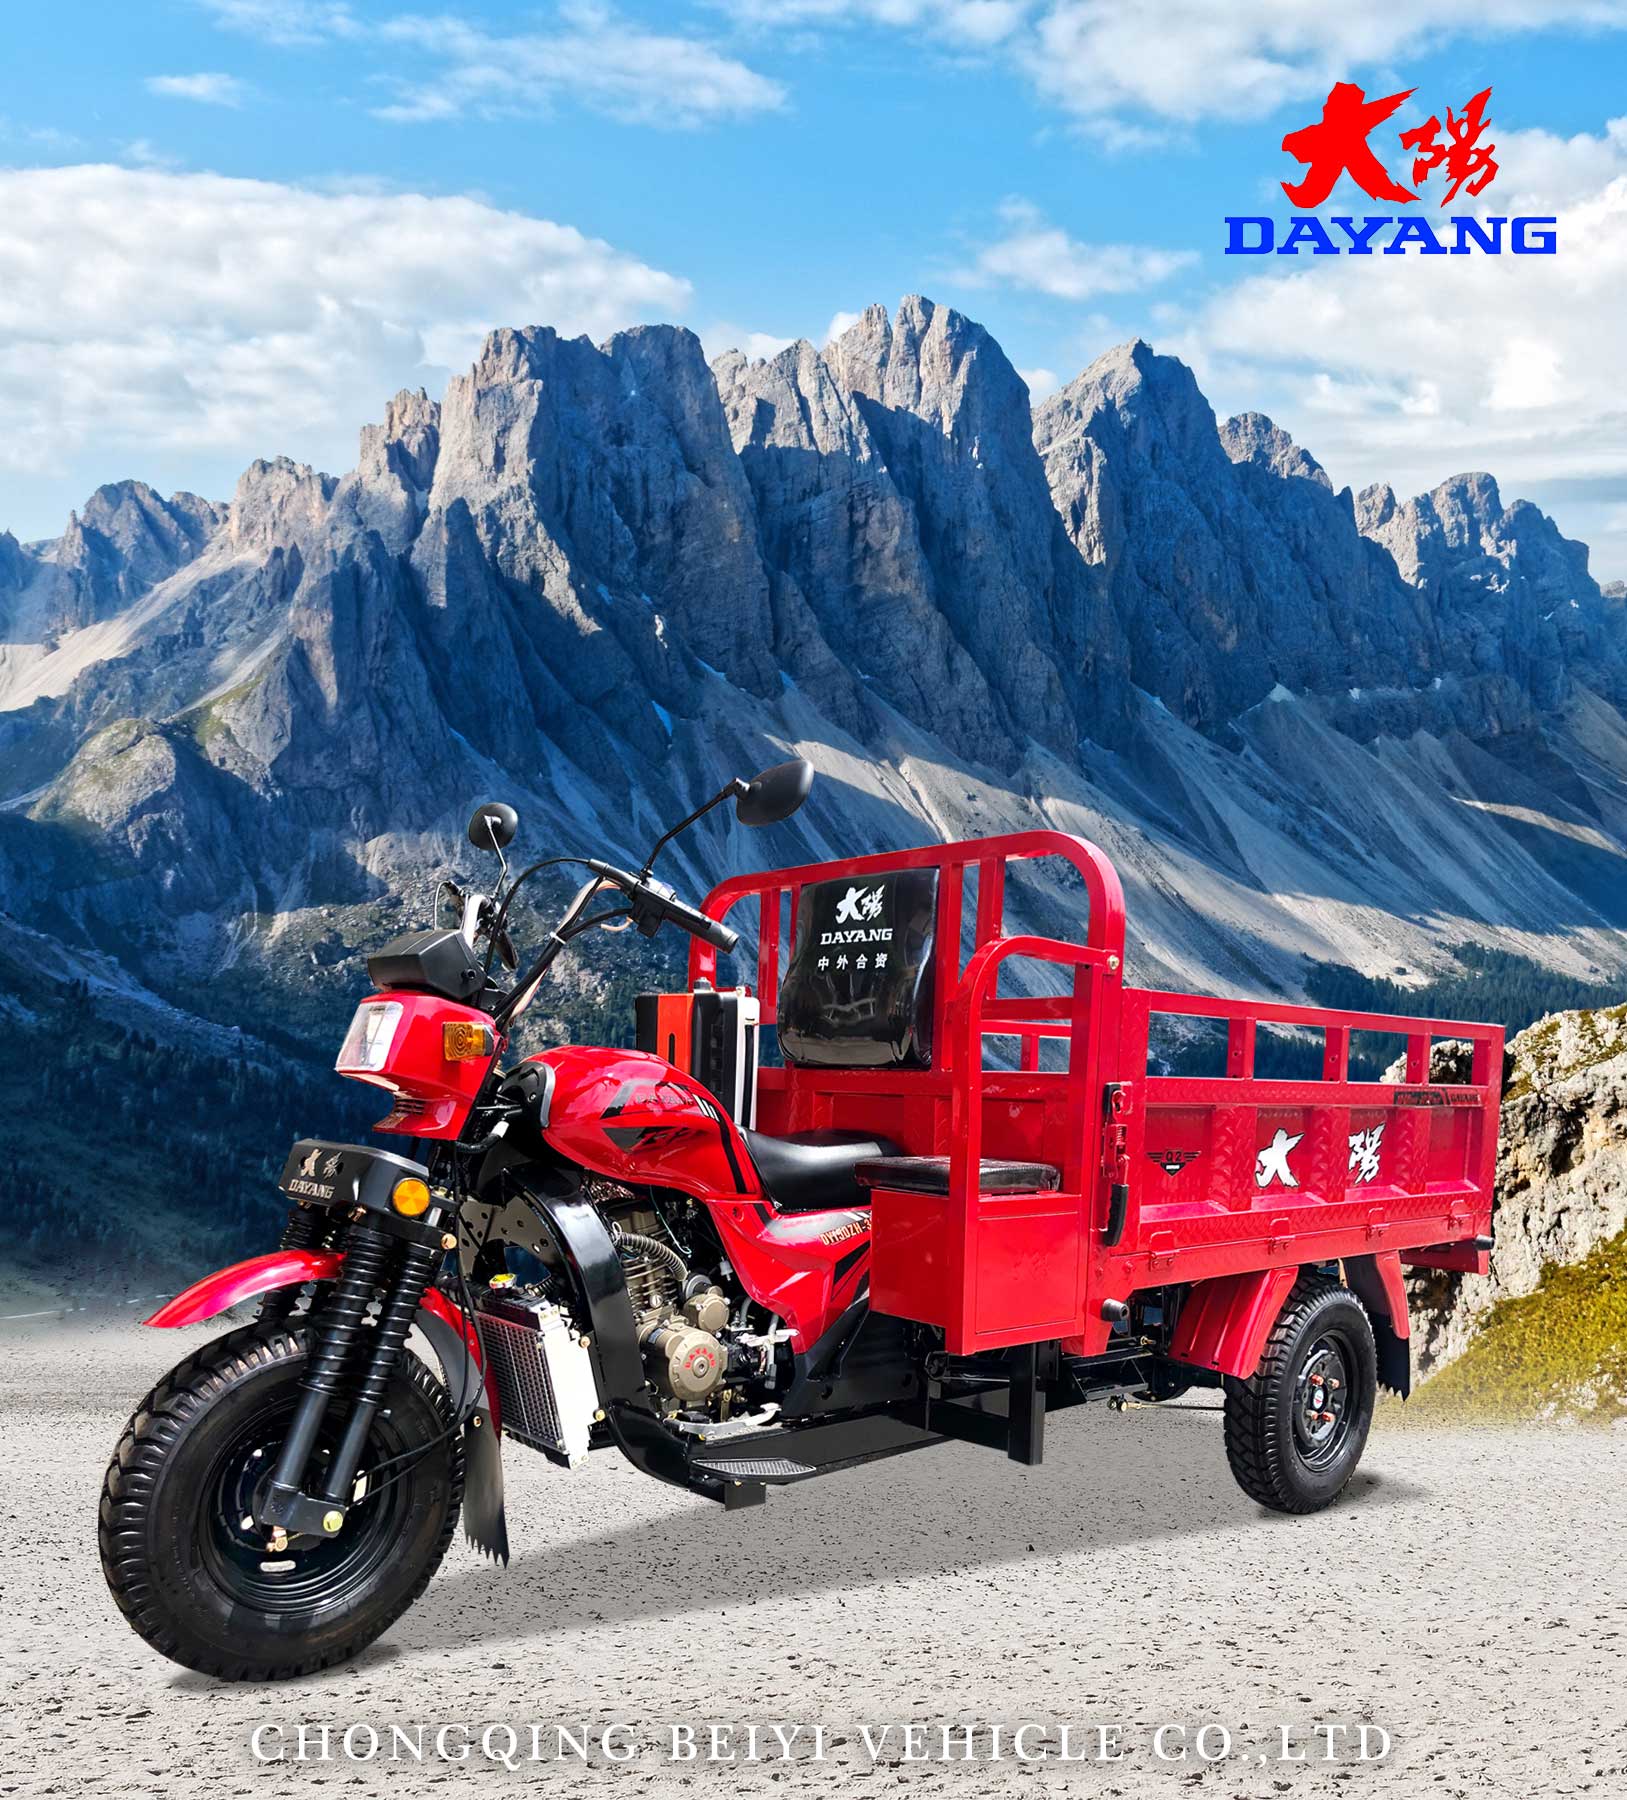 DY5 Heavy loading truck cargo tricycle three wheel motorcycle with the powerful engine 150CC/175CC/200CC